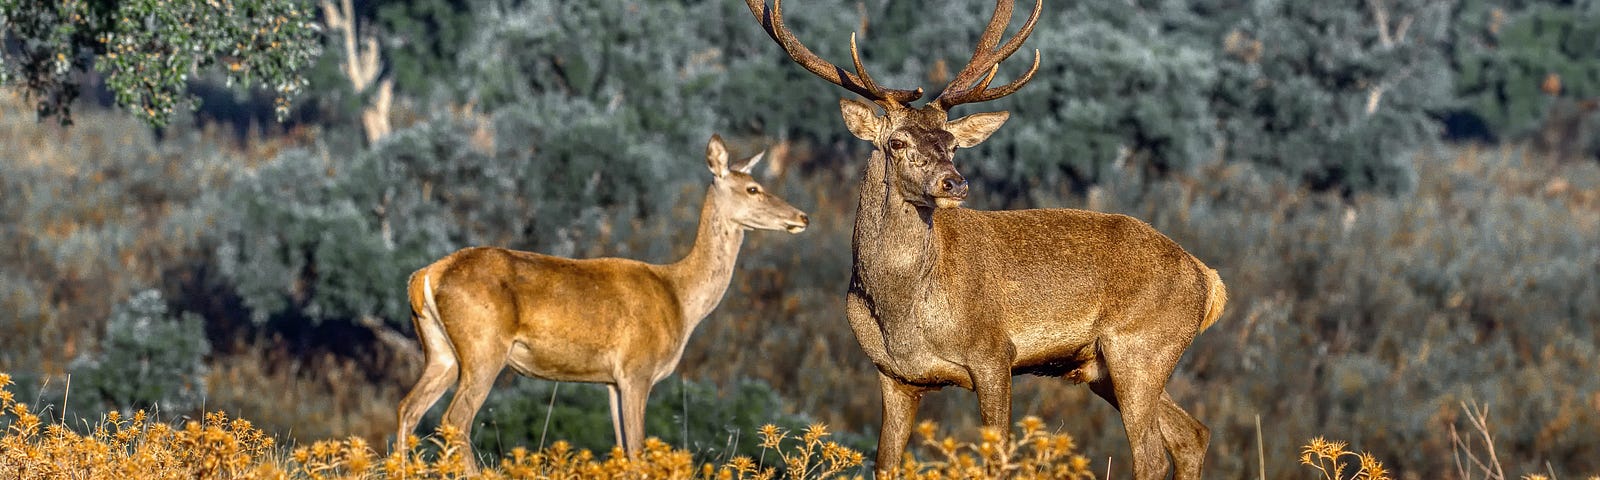 Two red deer, hind and hart, in the wild. Depositphotos.